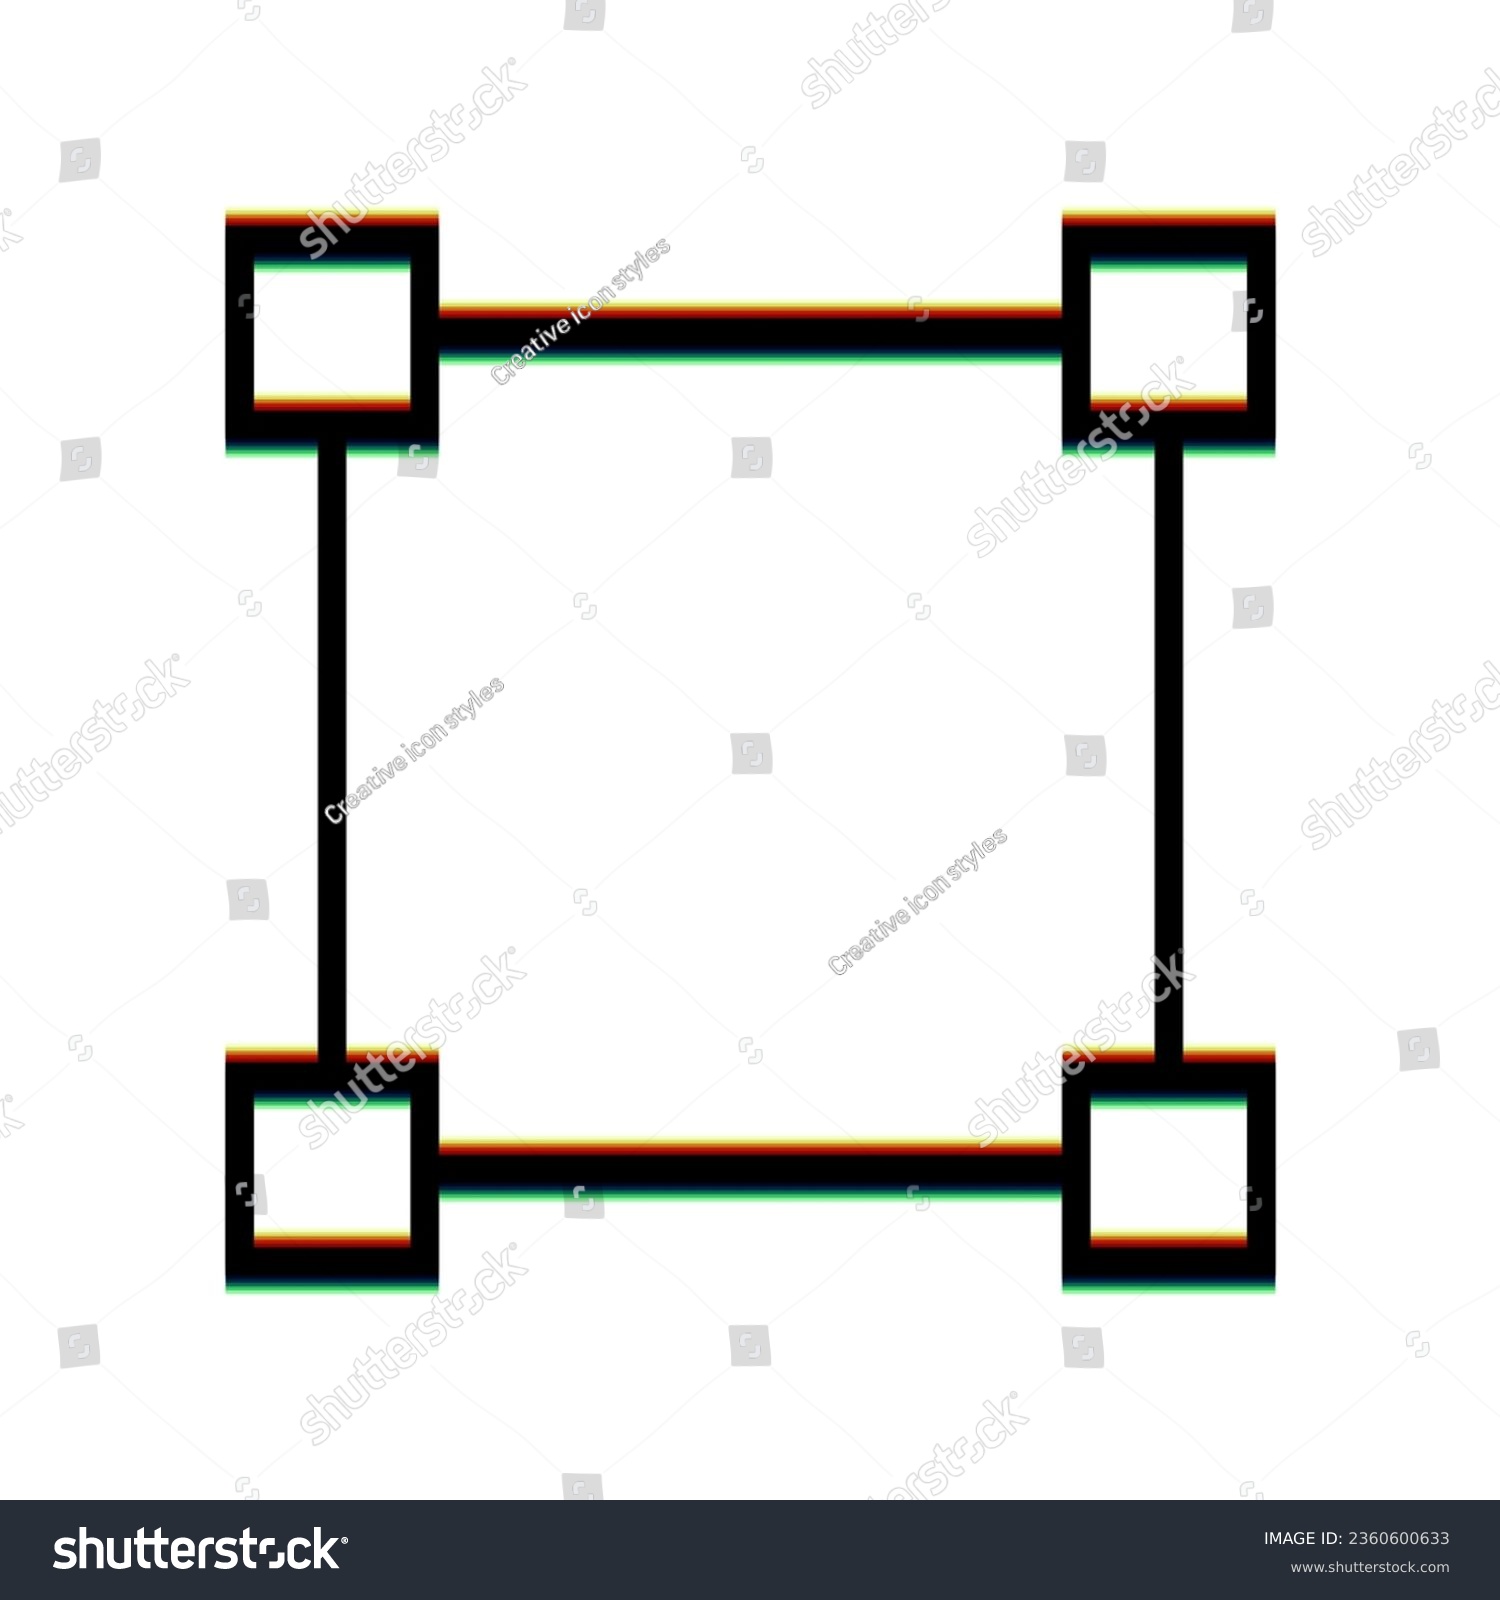 SVG of Square sign with anchors. Black Icon with vertical effect of color edge aberration at white background. Illustration. svg